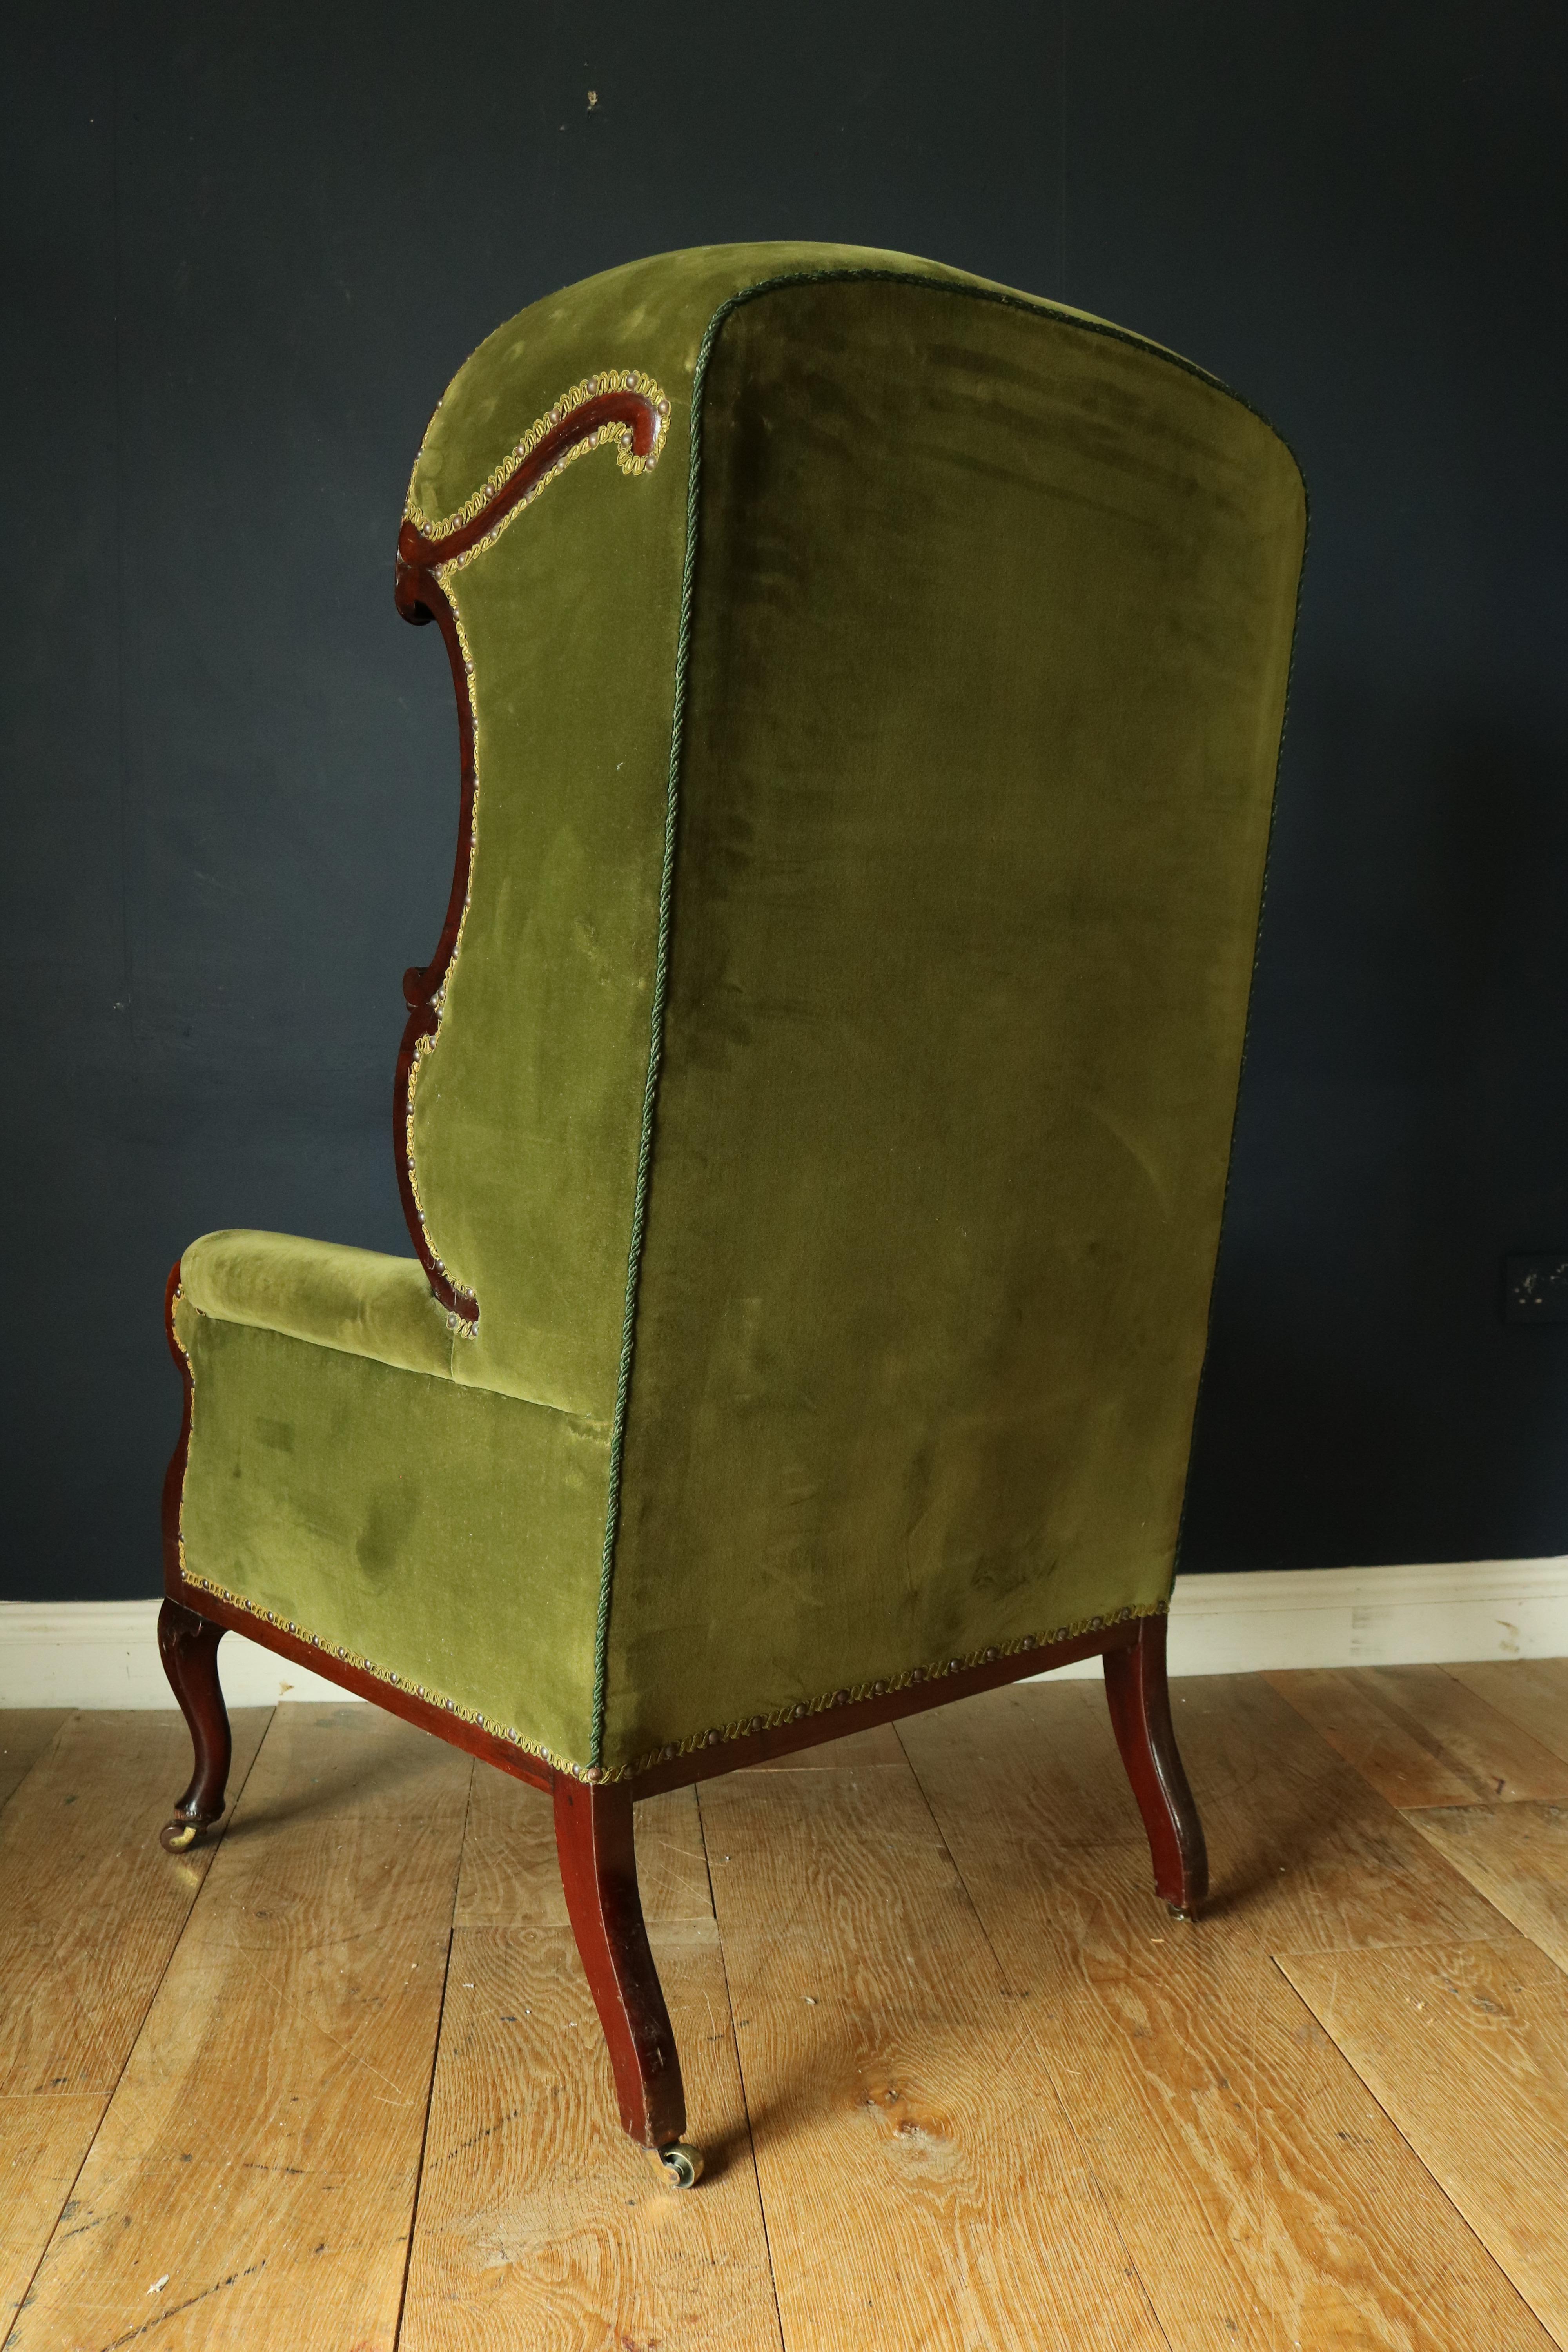 Other Late 19th-Early 20th Century Mahogany Porters Chair